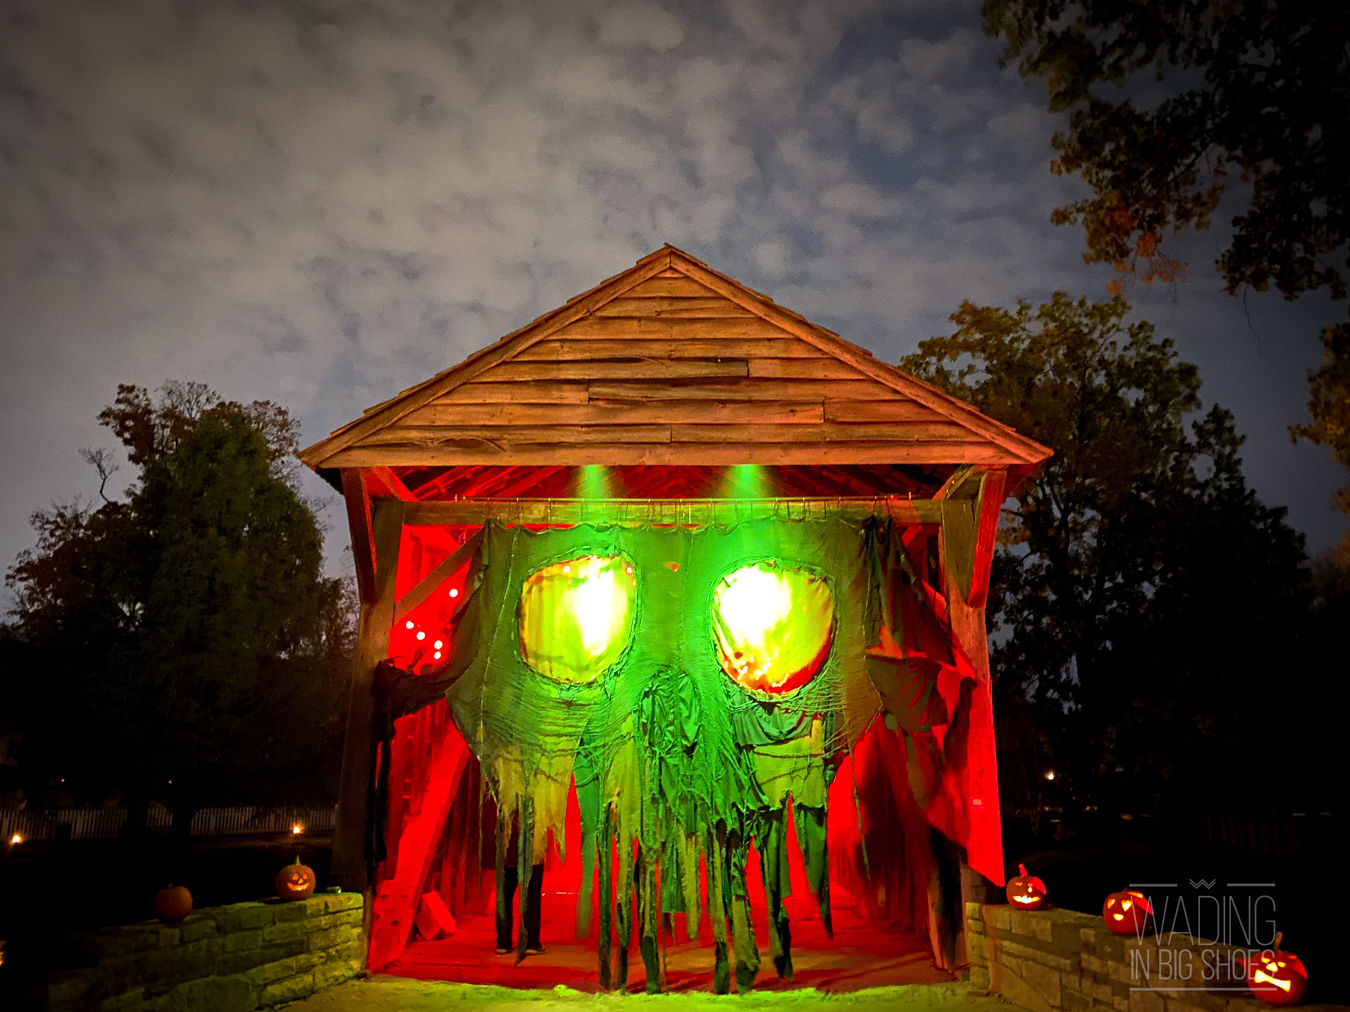 Wading in Big Shoes - Hallowe'en in Greenfield Village, 2020 Edition: A Reimagined Celebration